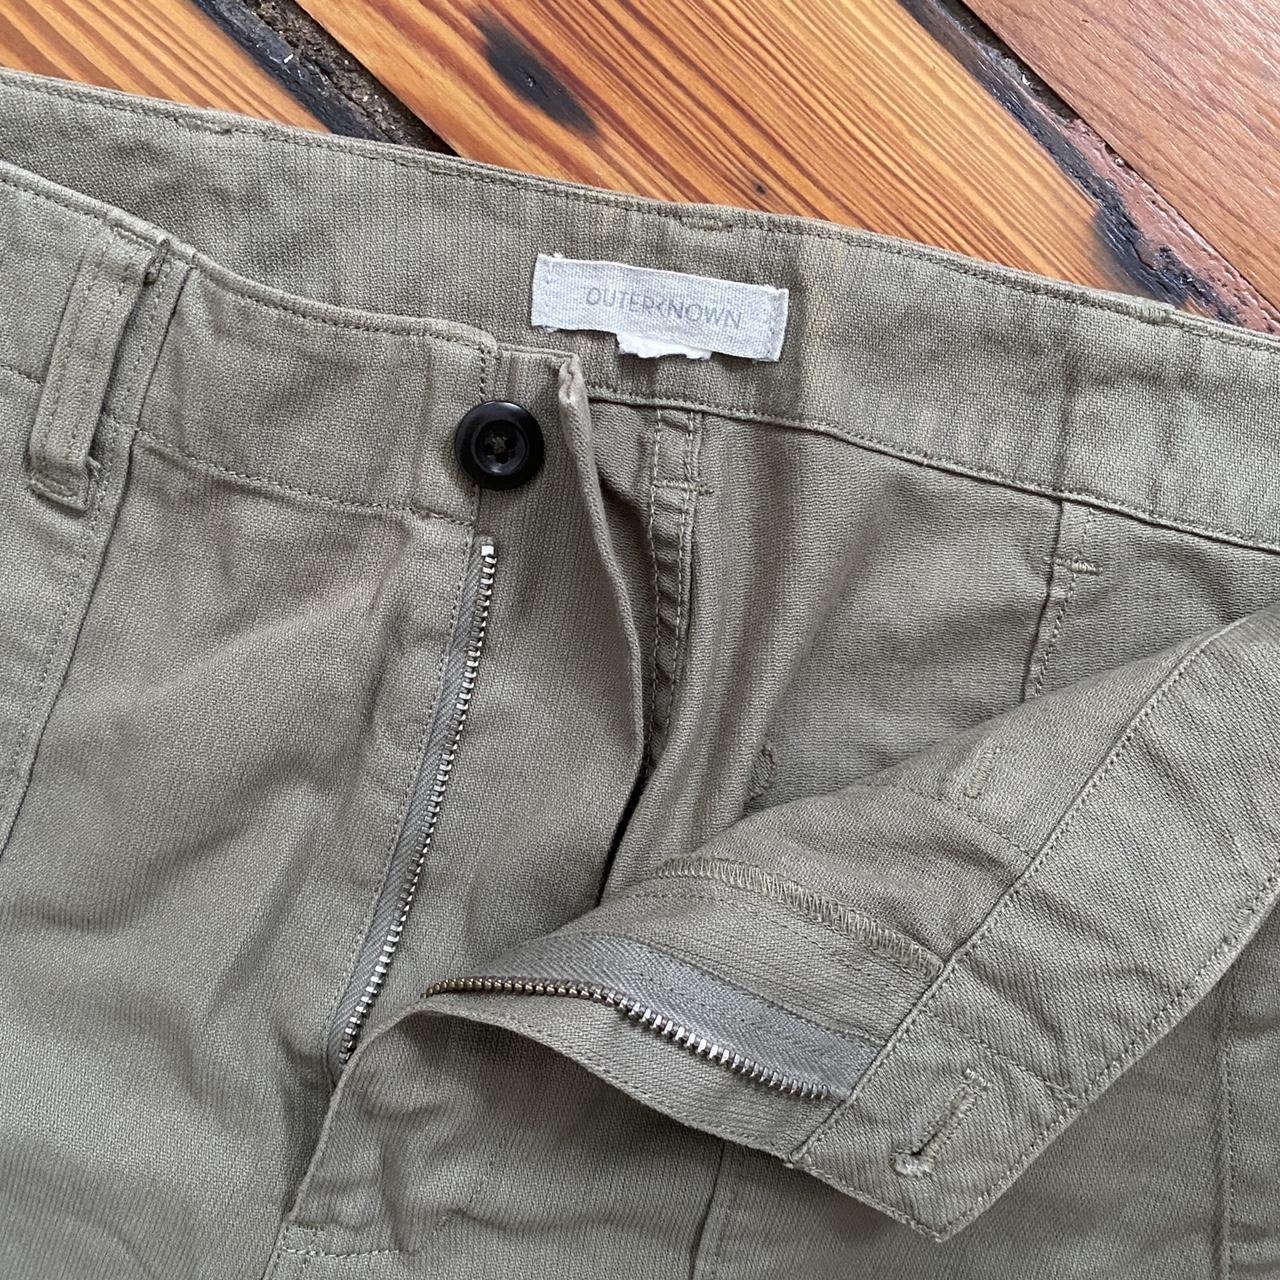 Outerknown Women's Khaki and Green Trousers | Depop